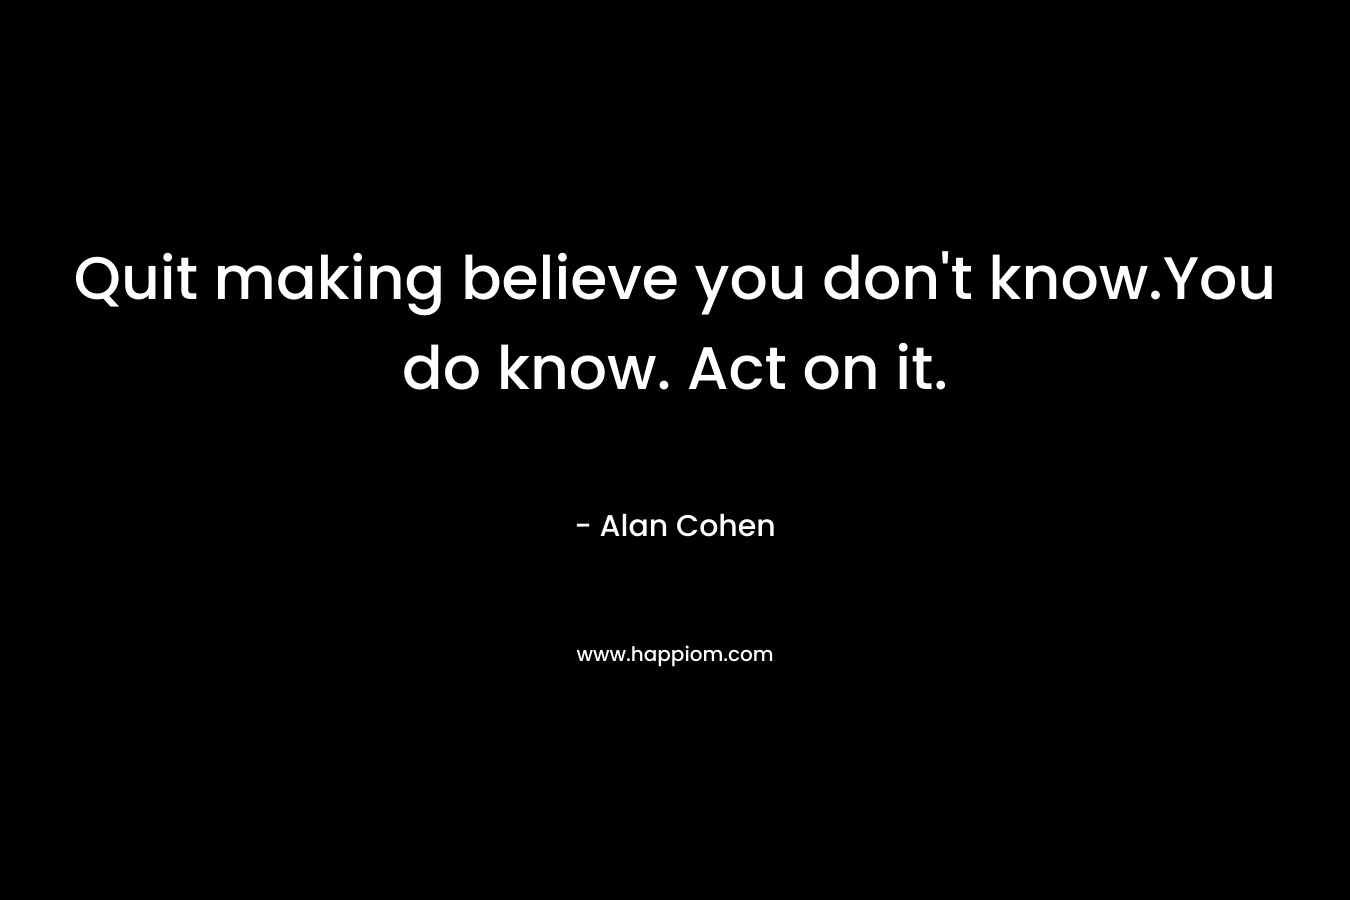 Quit making believe you don’t know.You do know. Act on it. – Alan Cohen